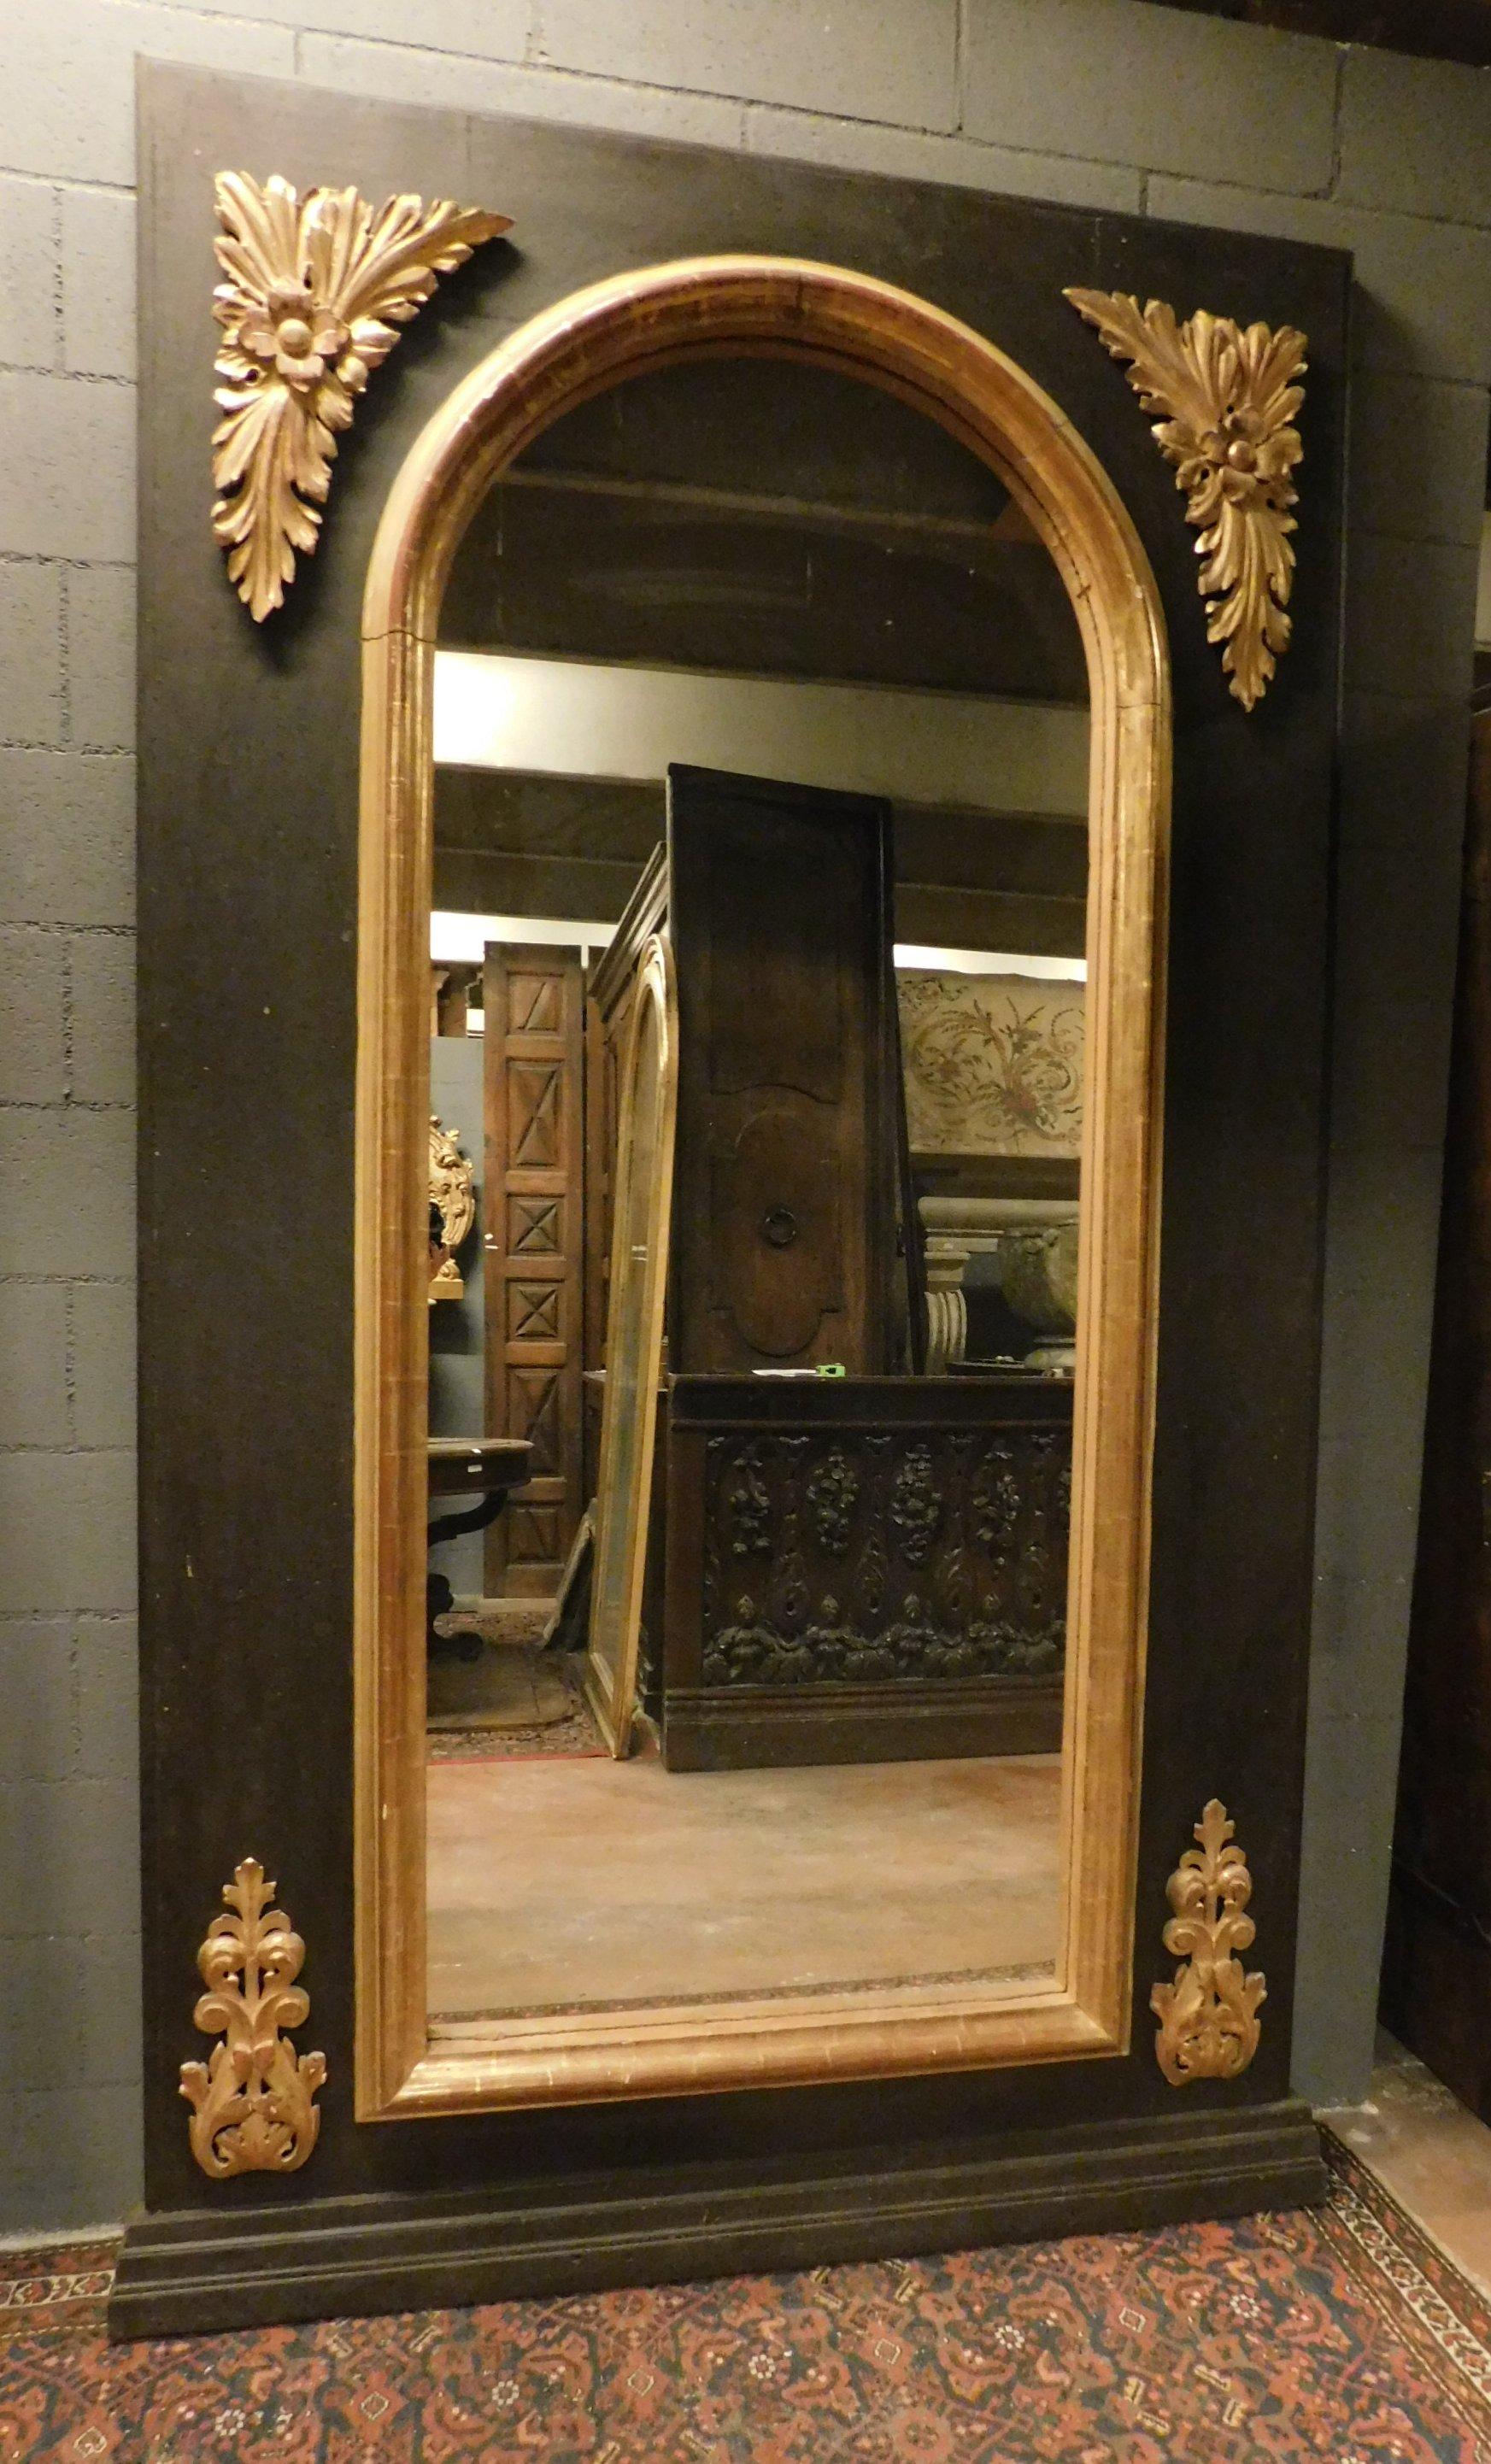 Italian Antique Black Lacquered Mirror, with Golden Decorations, 1800, Italy